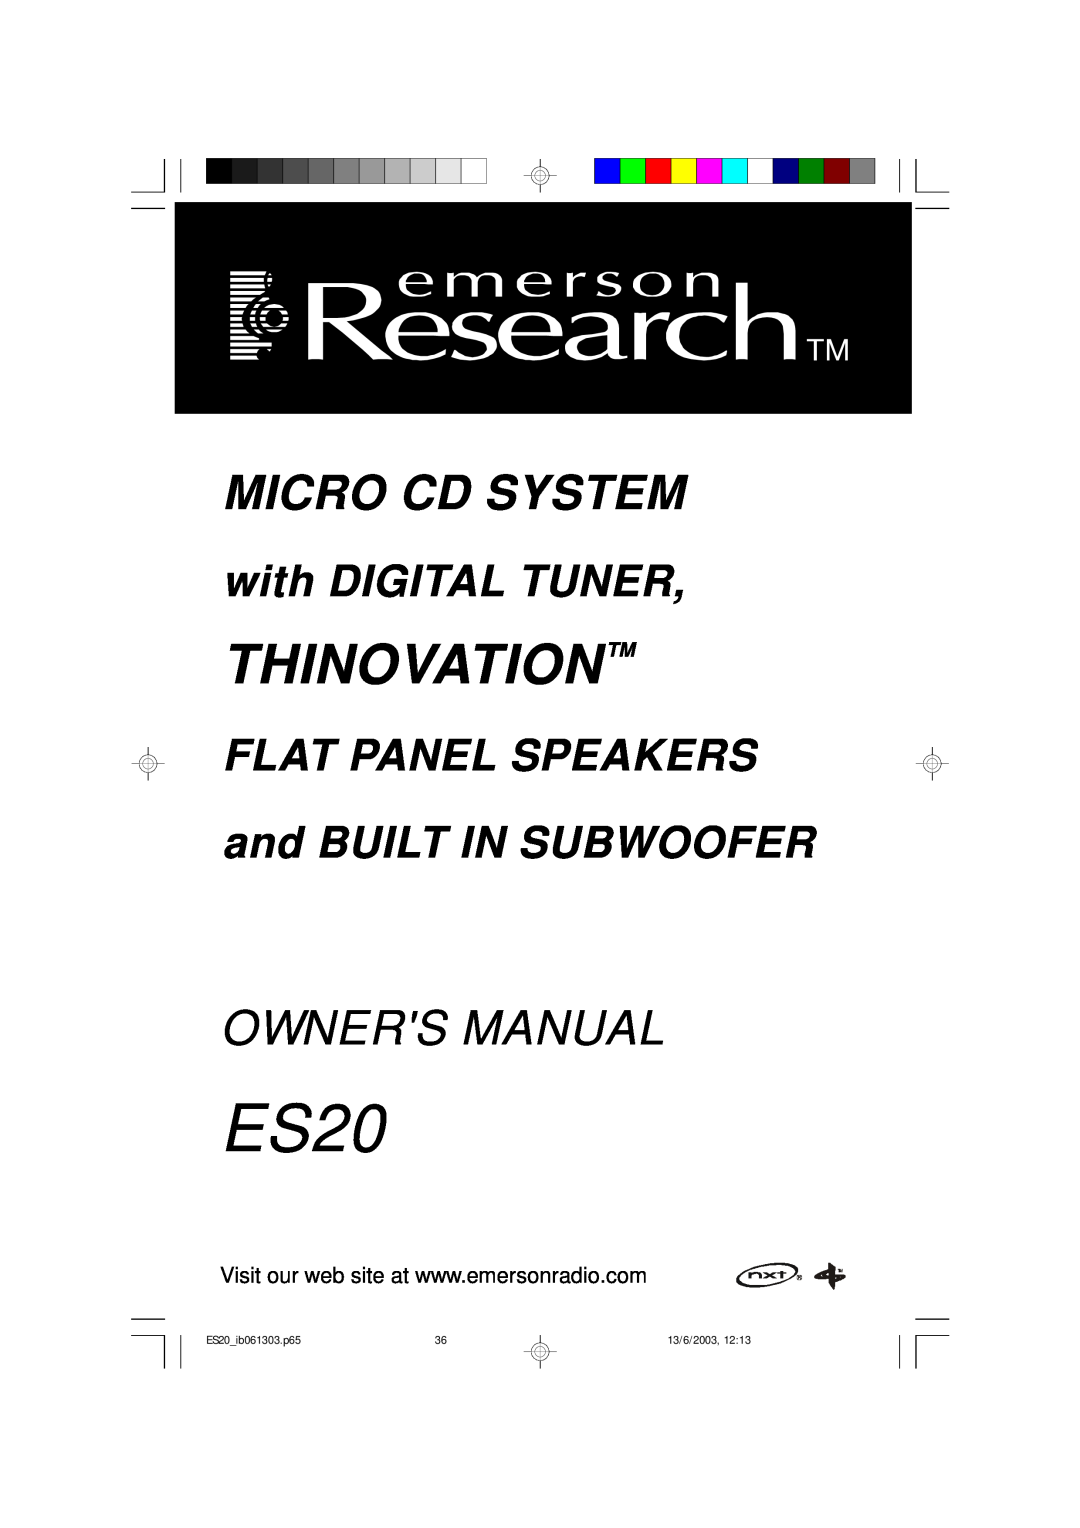 Emerson ES20 owner manual Thinovation, Micro Cd System, with DIGITAL TUNER, FLAT PANEL SPEAKERS and BUILT IN SUBWOOFER 